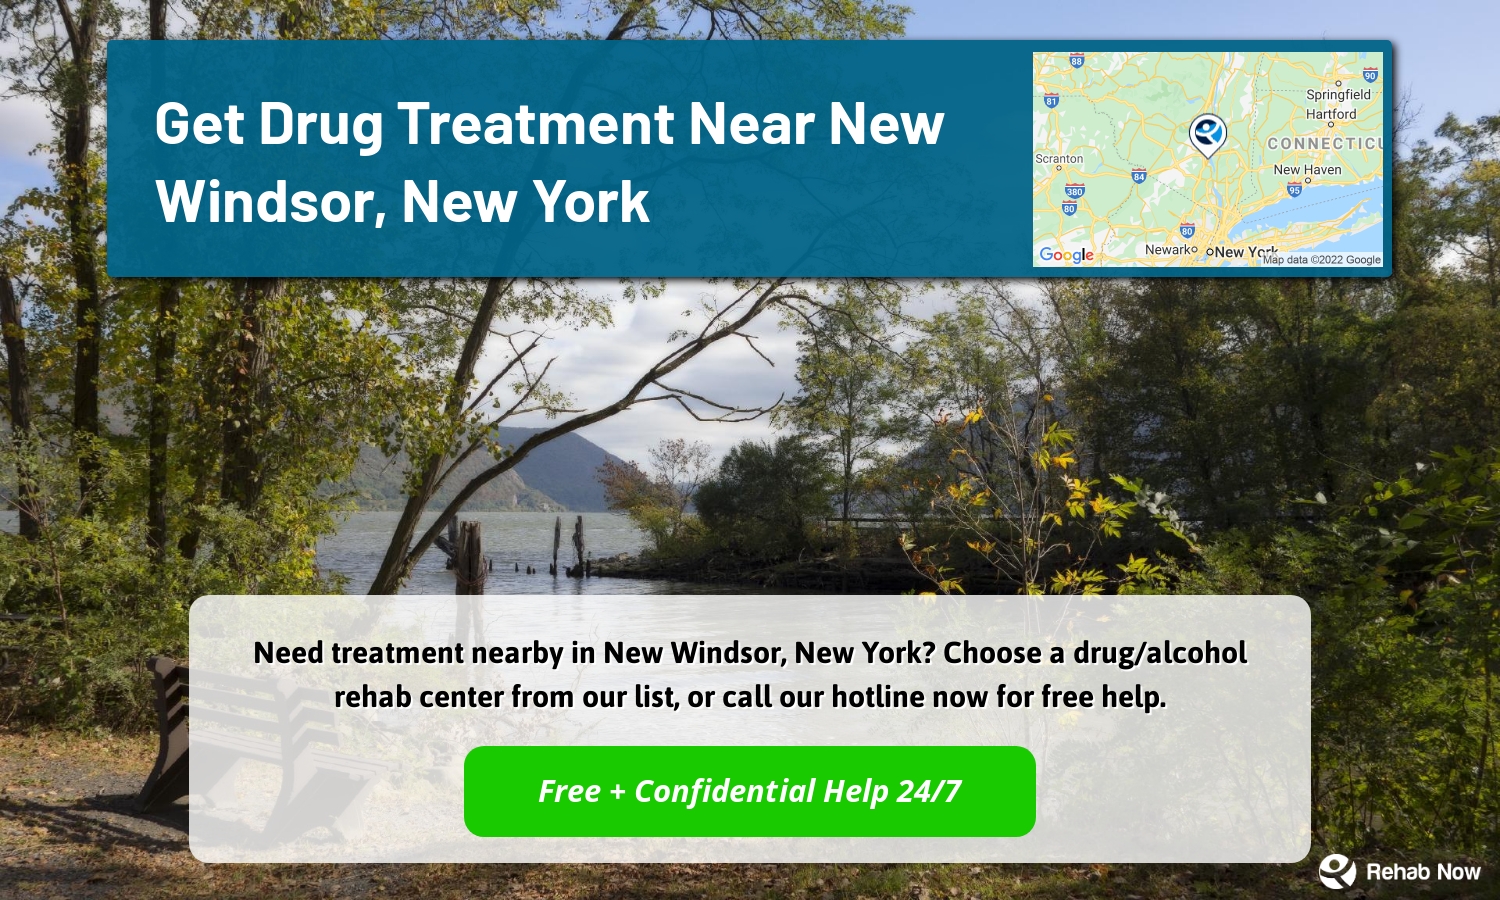 Need treatment nearby in New Windsor, New York? Choose a drug/alcohol rehab center from our list, or call our hotline now for free help.